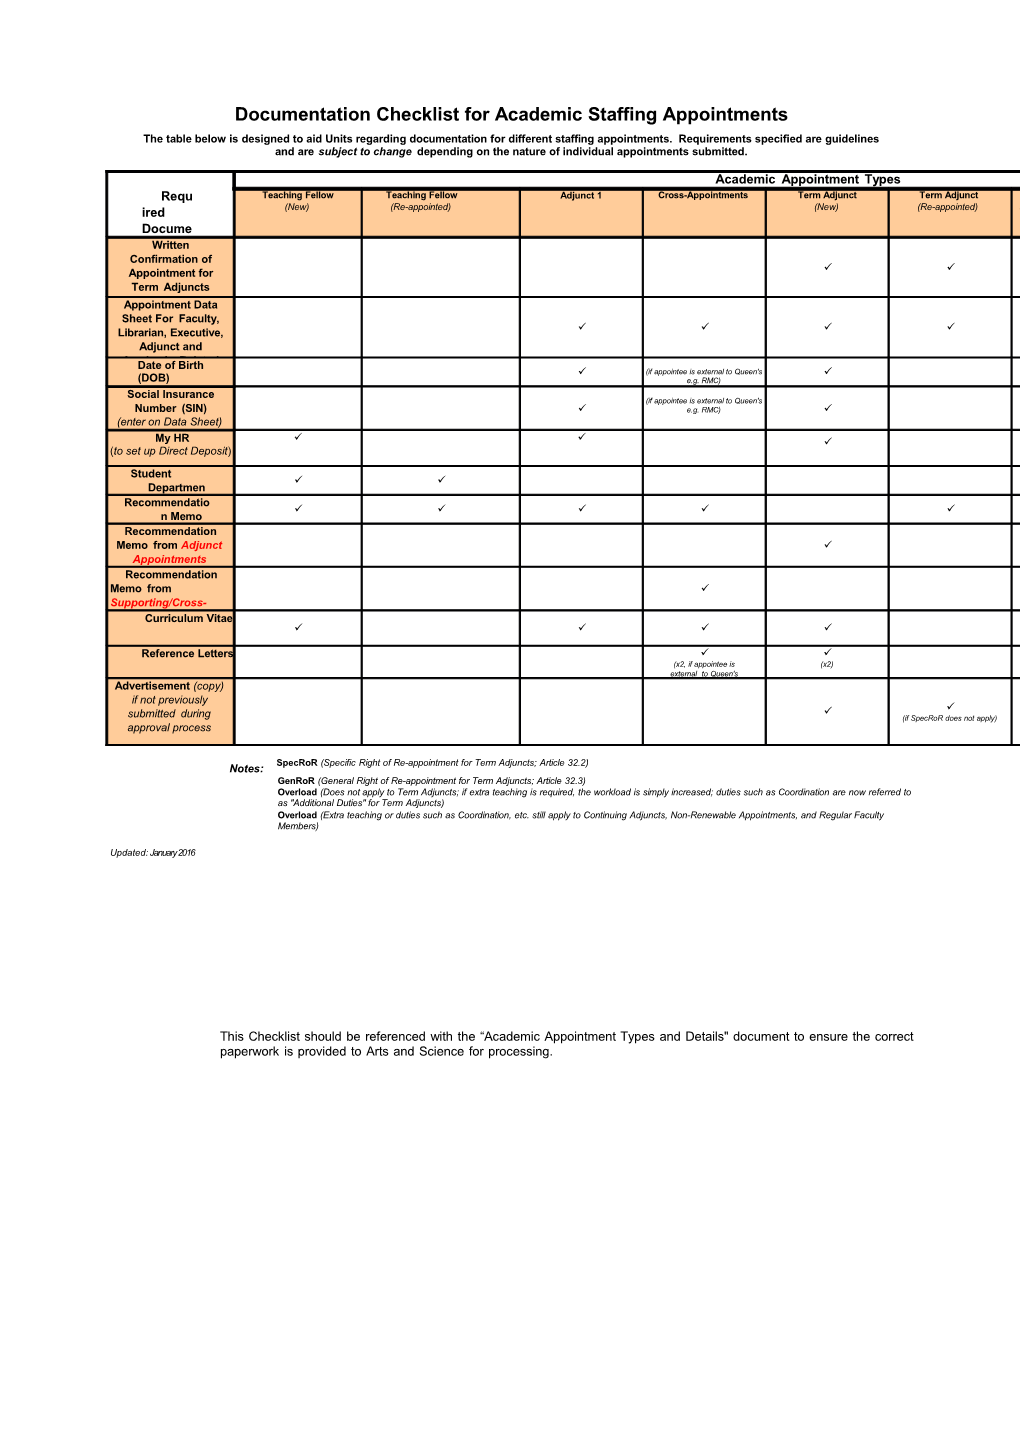 Documentation Checklist for Academic Staffing Appointments (Jan 2015)